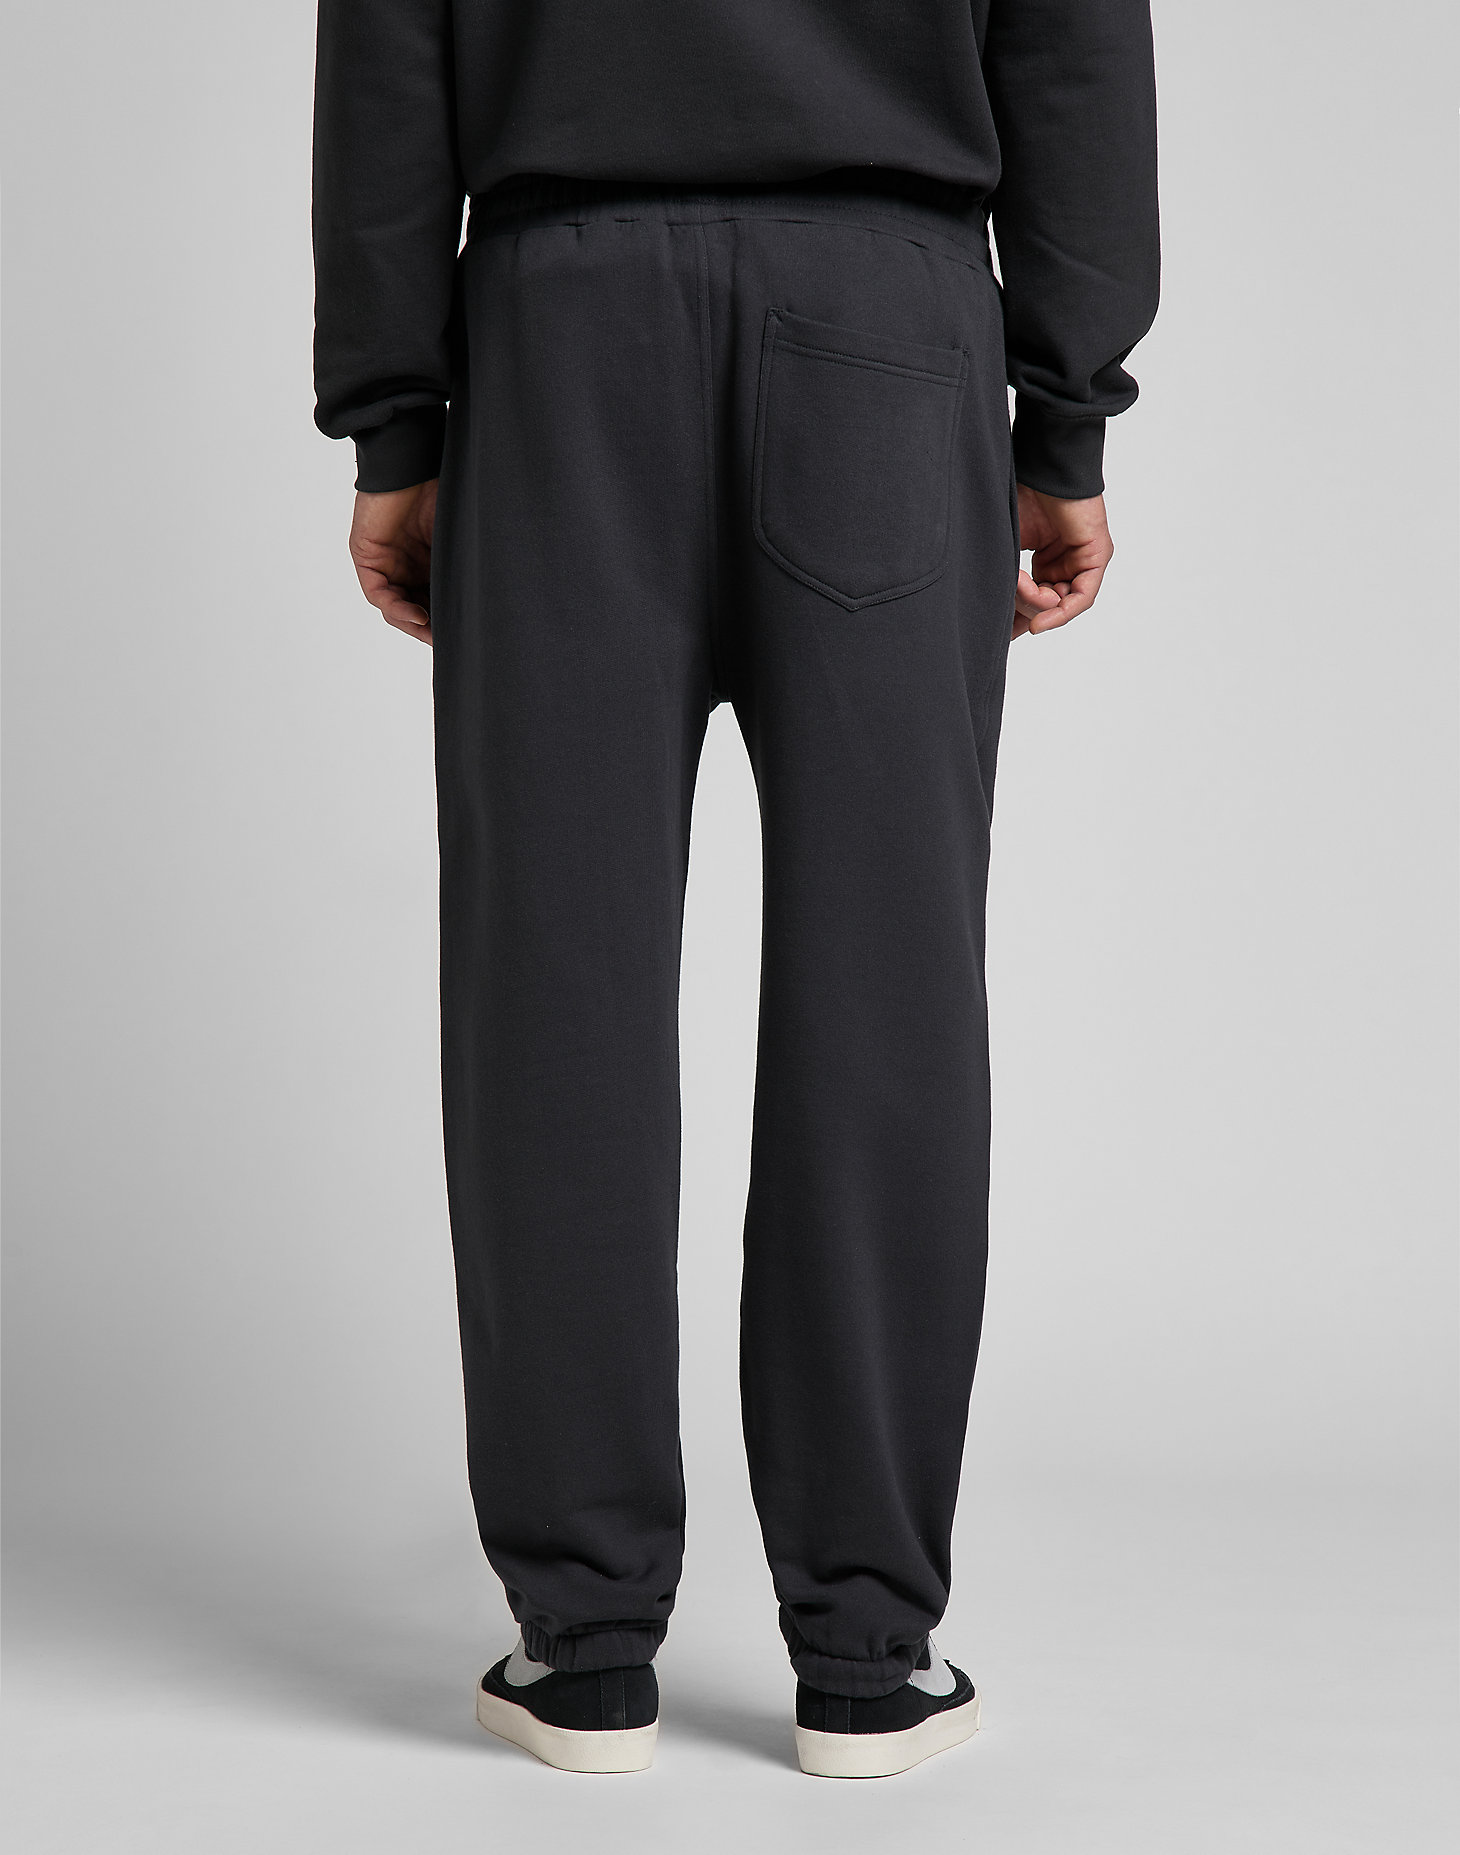 Sweat Pant in Washed Black alternative view 1